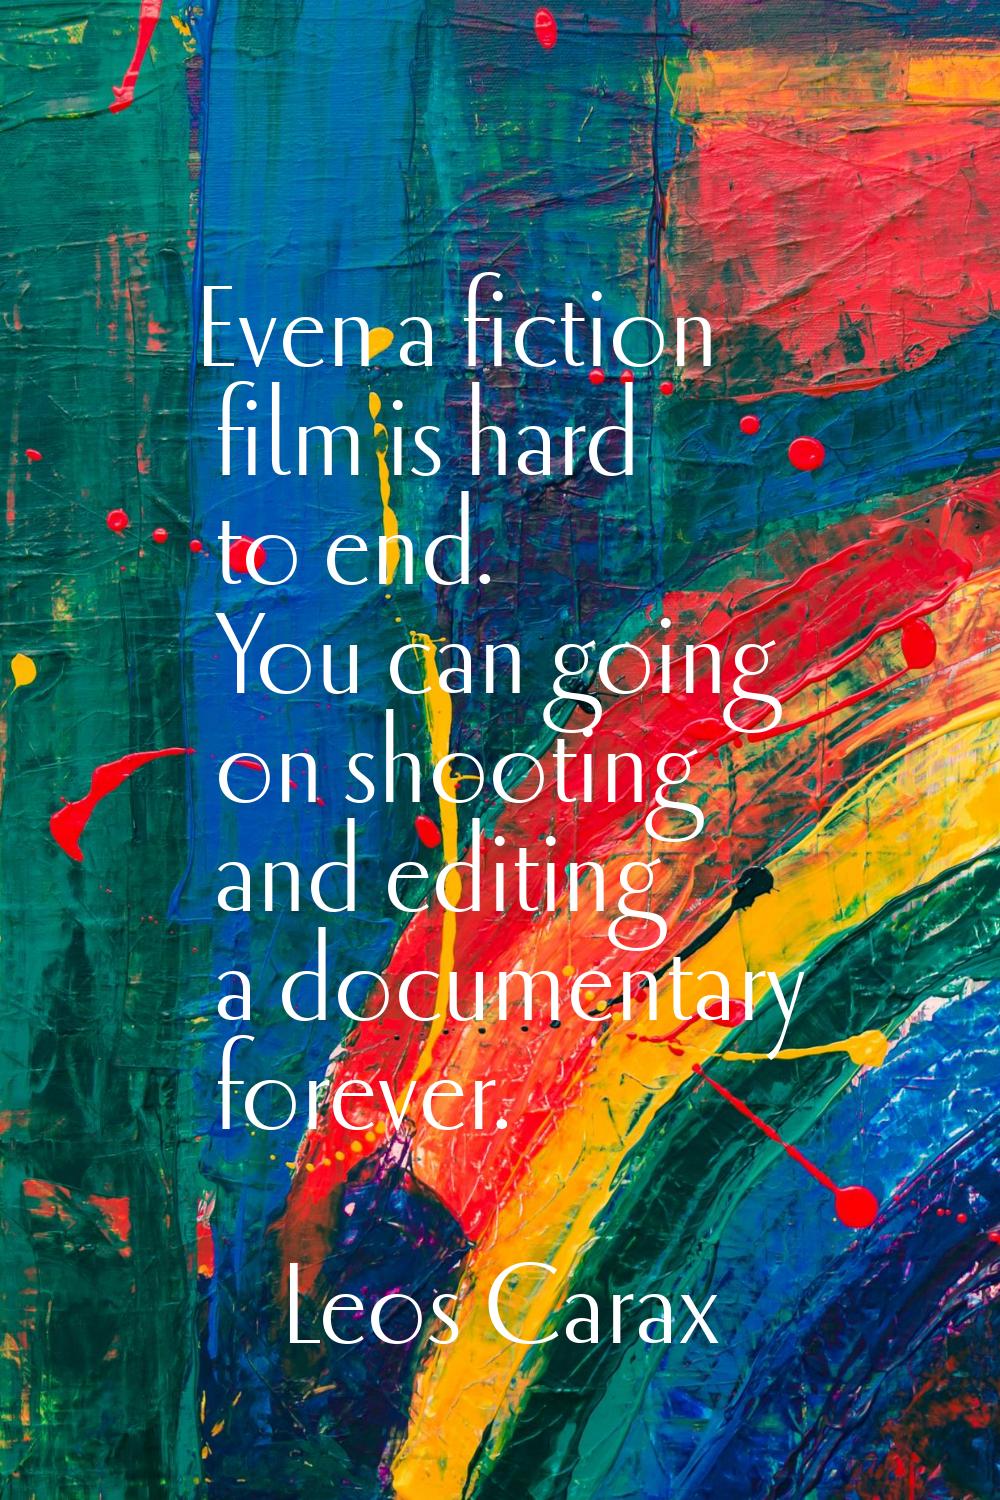 Even a fiction film is hard to end. You can going on shooting and editing a documentary forever.